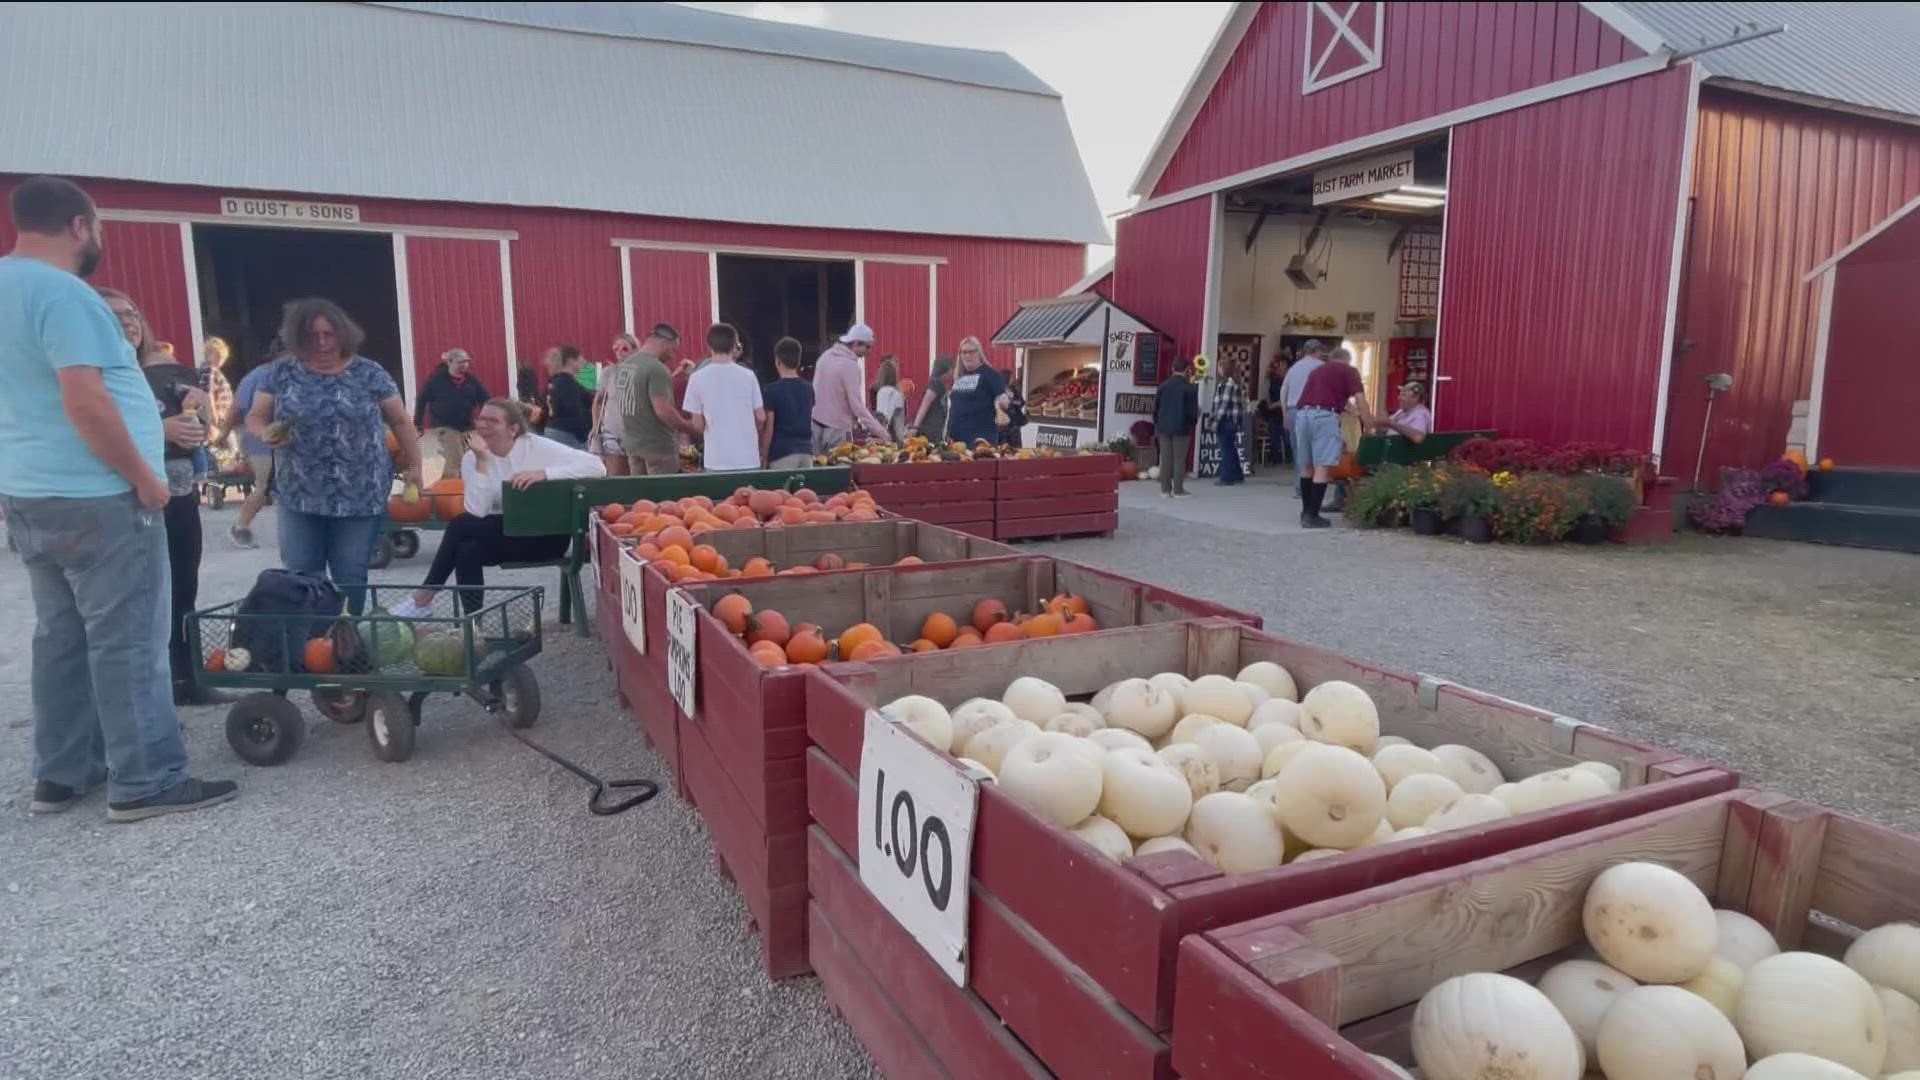 Our Madelyne Watkins is at Gust Brother's Pumpkin Farm as they gear up for their final weekend before Halloween.